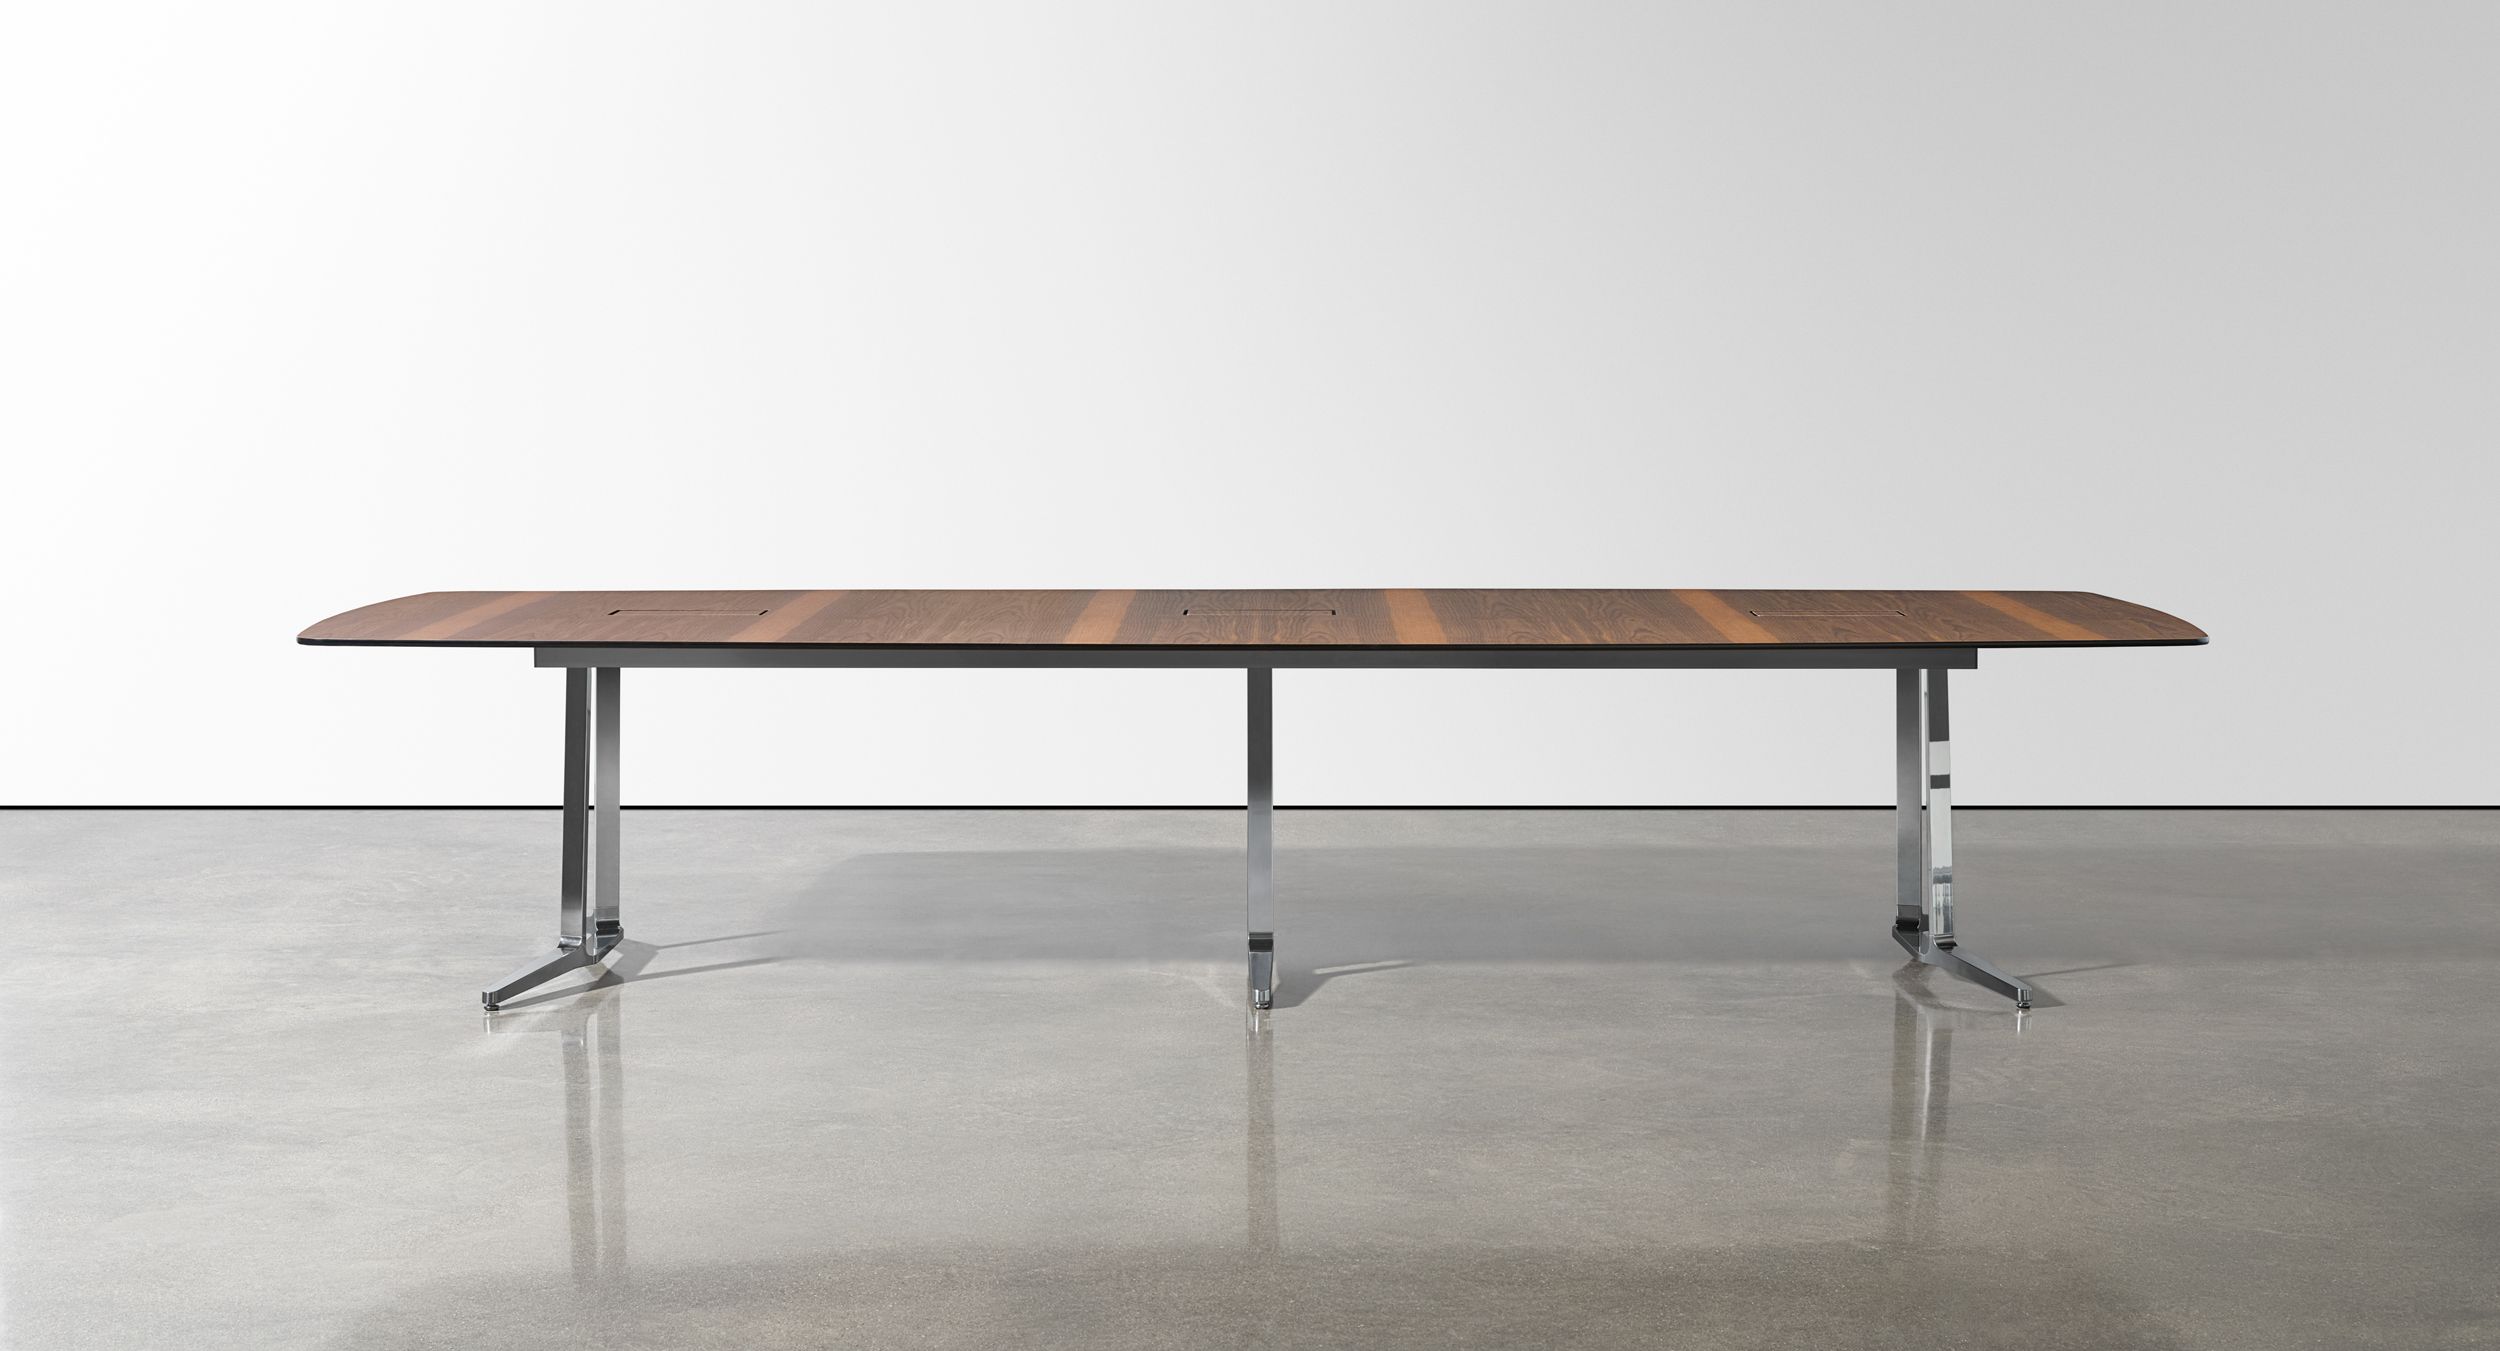 Skill conference tables offer a beautiful, light-scale aesthetic.